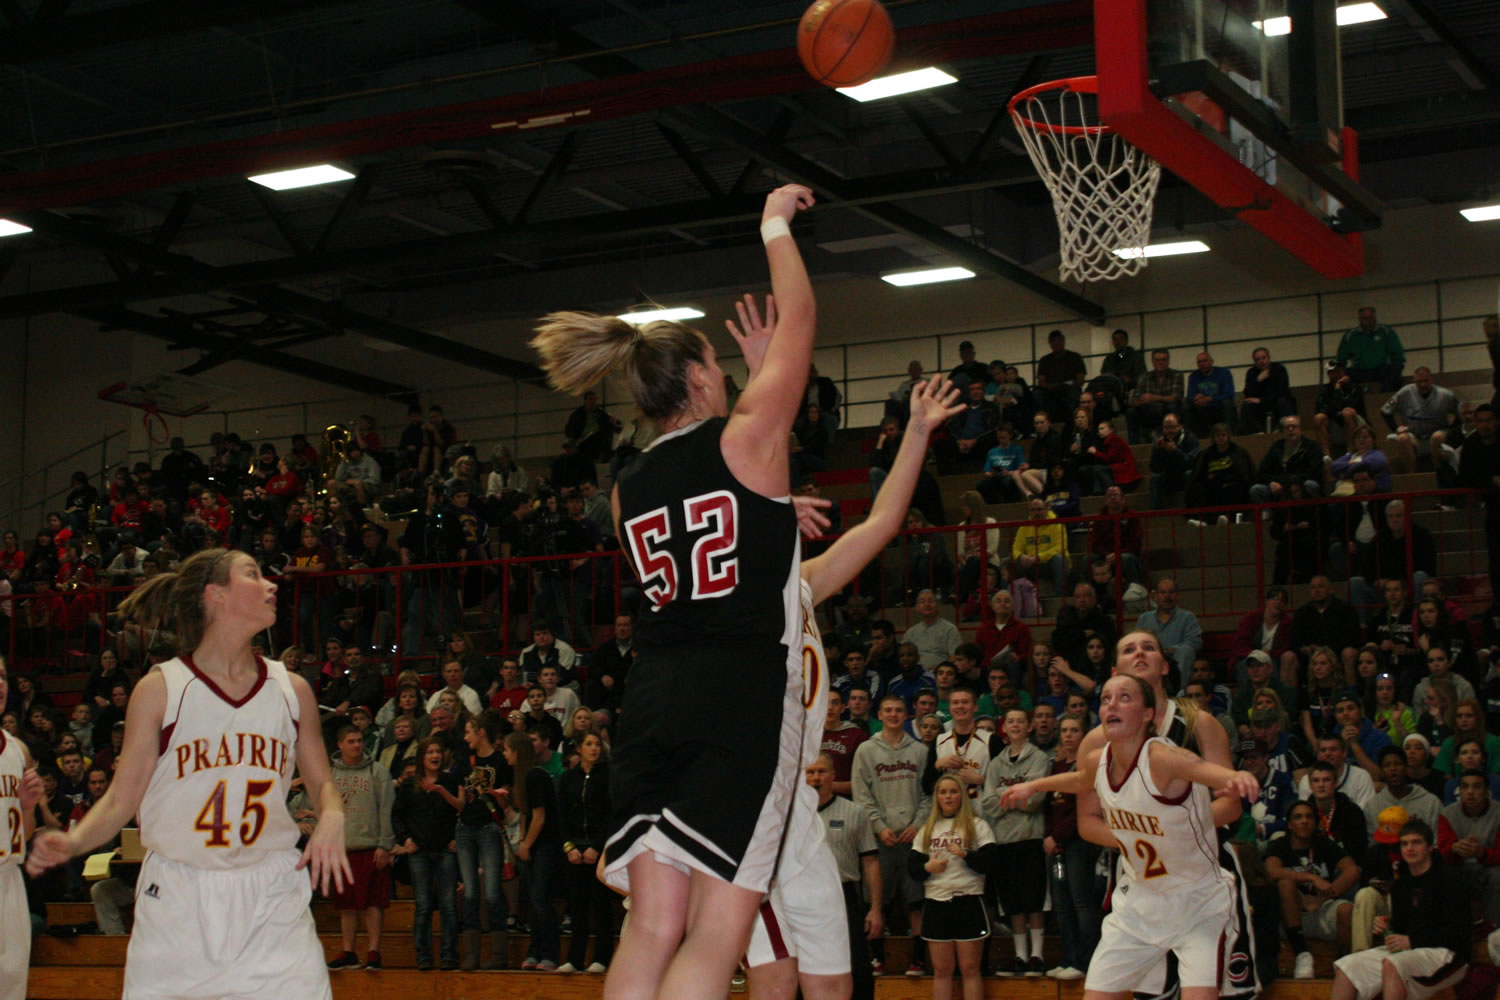 Jenka Stiasna puts the ball in the basket for Camas in the district championship game against Prairie Friday, at Fort Vancouver High School.